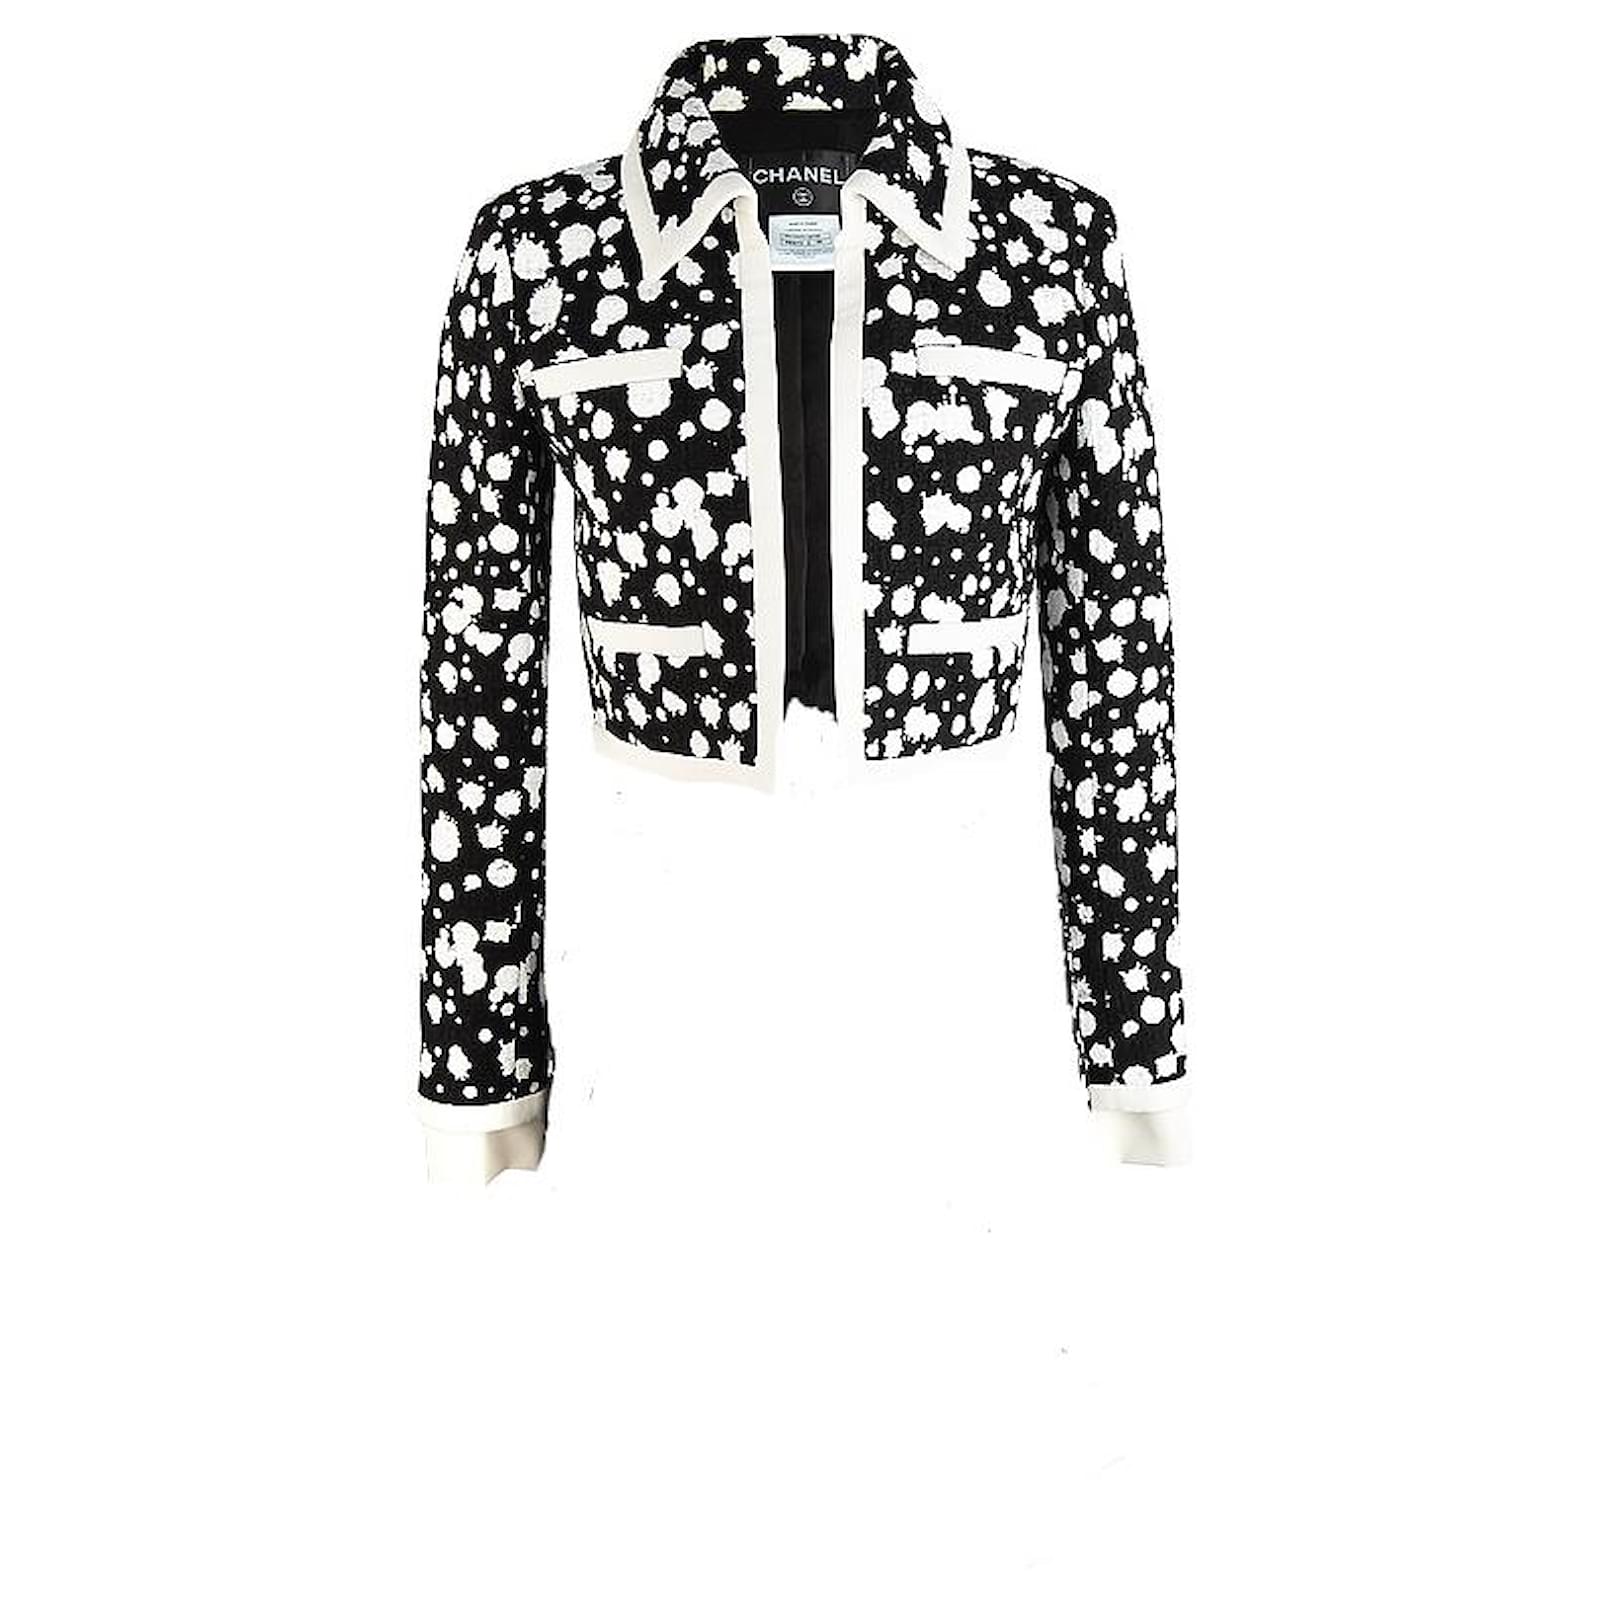 chanel jacket black and white